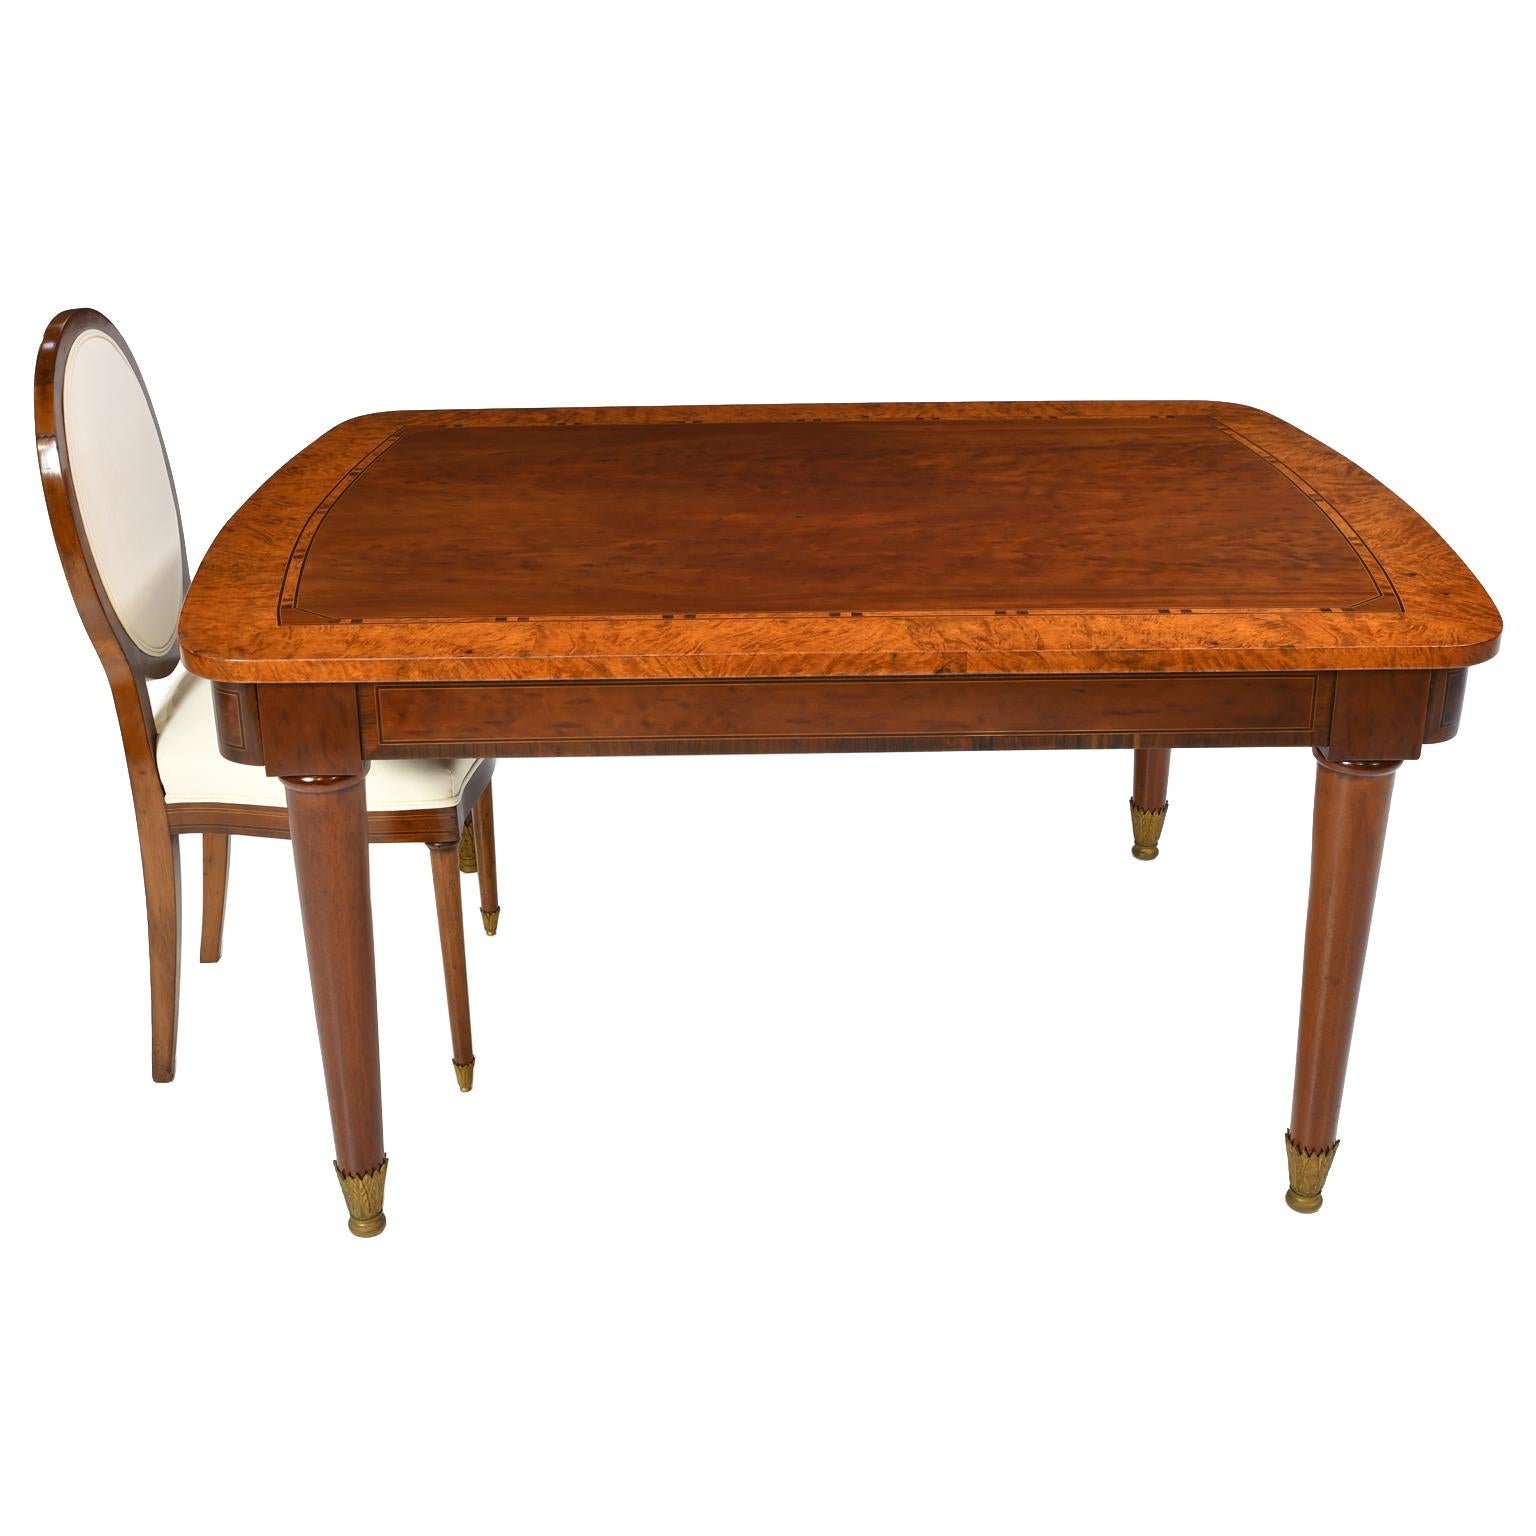 This unique early Art Deco rectangular table made in Brussels at the fabric of A. Brants - Tonnemans is made of book matched quilted plum mahogany, root wood and various woods like kingwood, satinwood, ebony, and rosewood for the line inlays and